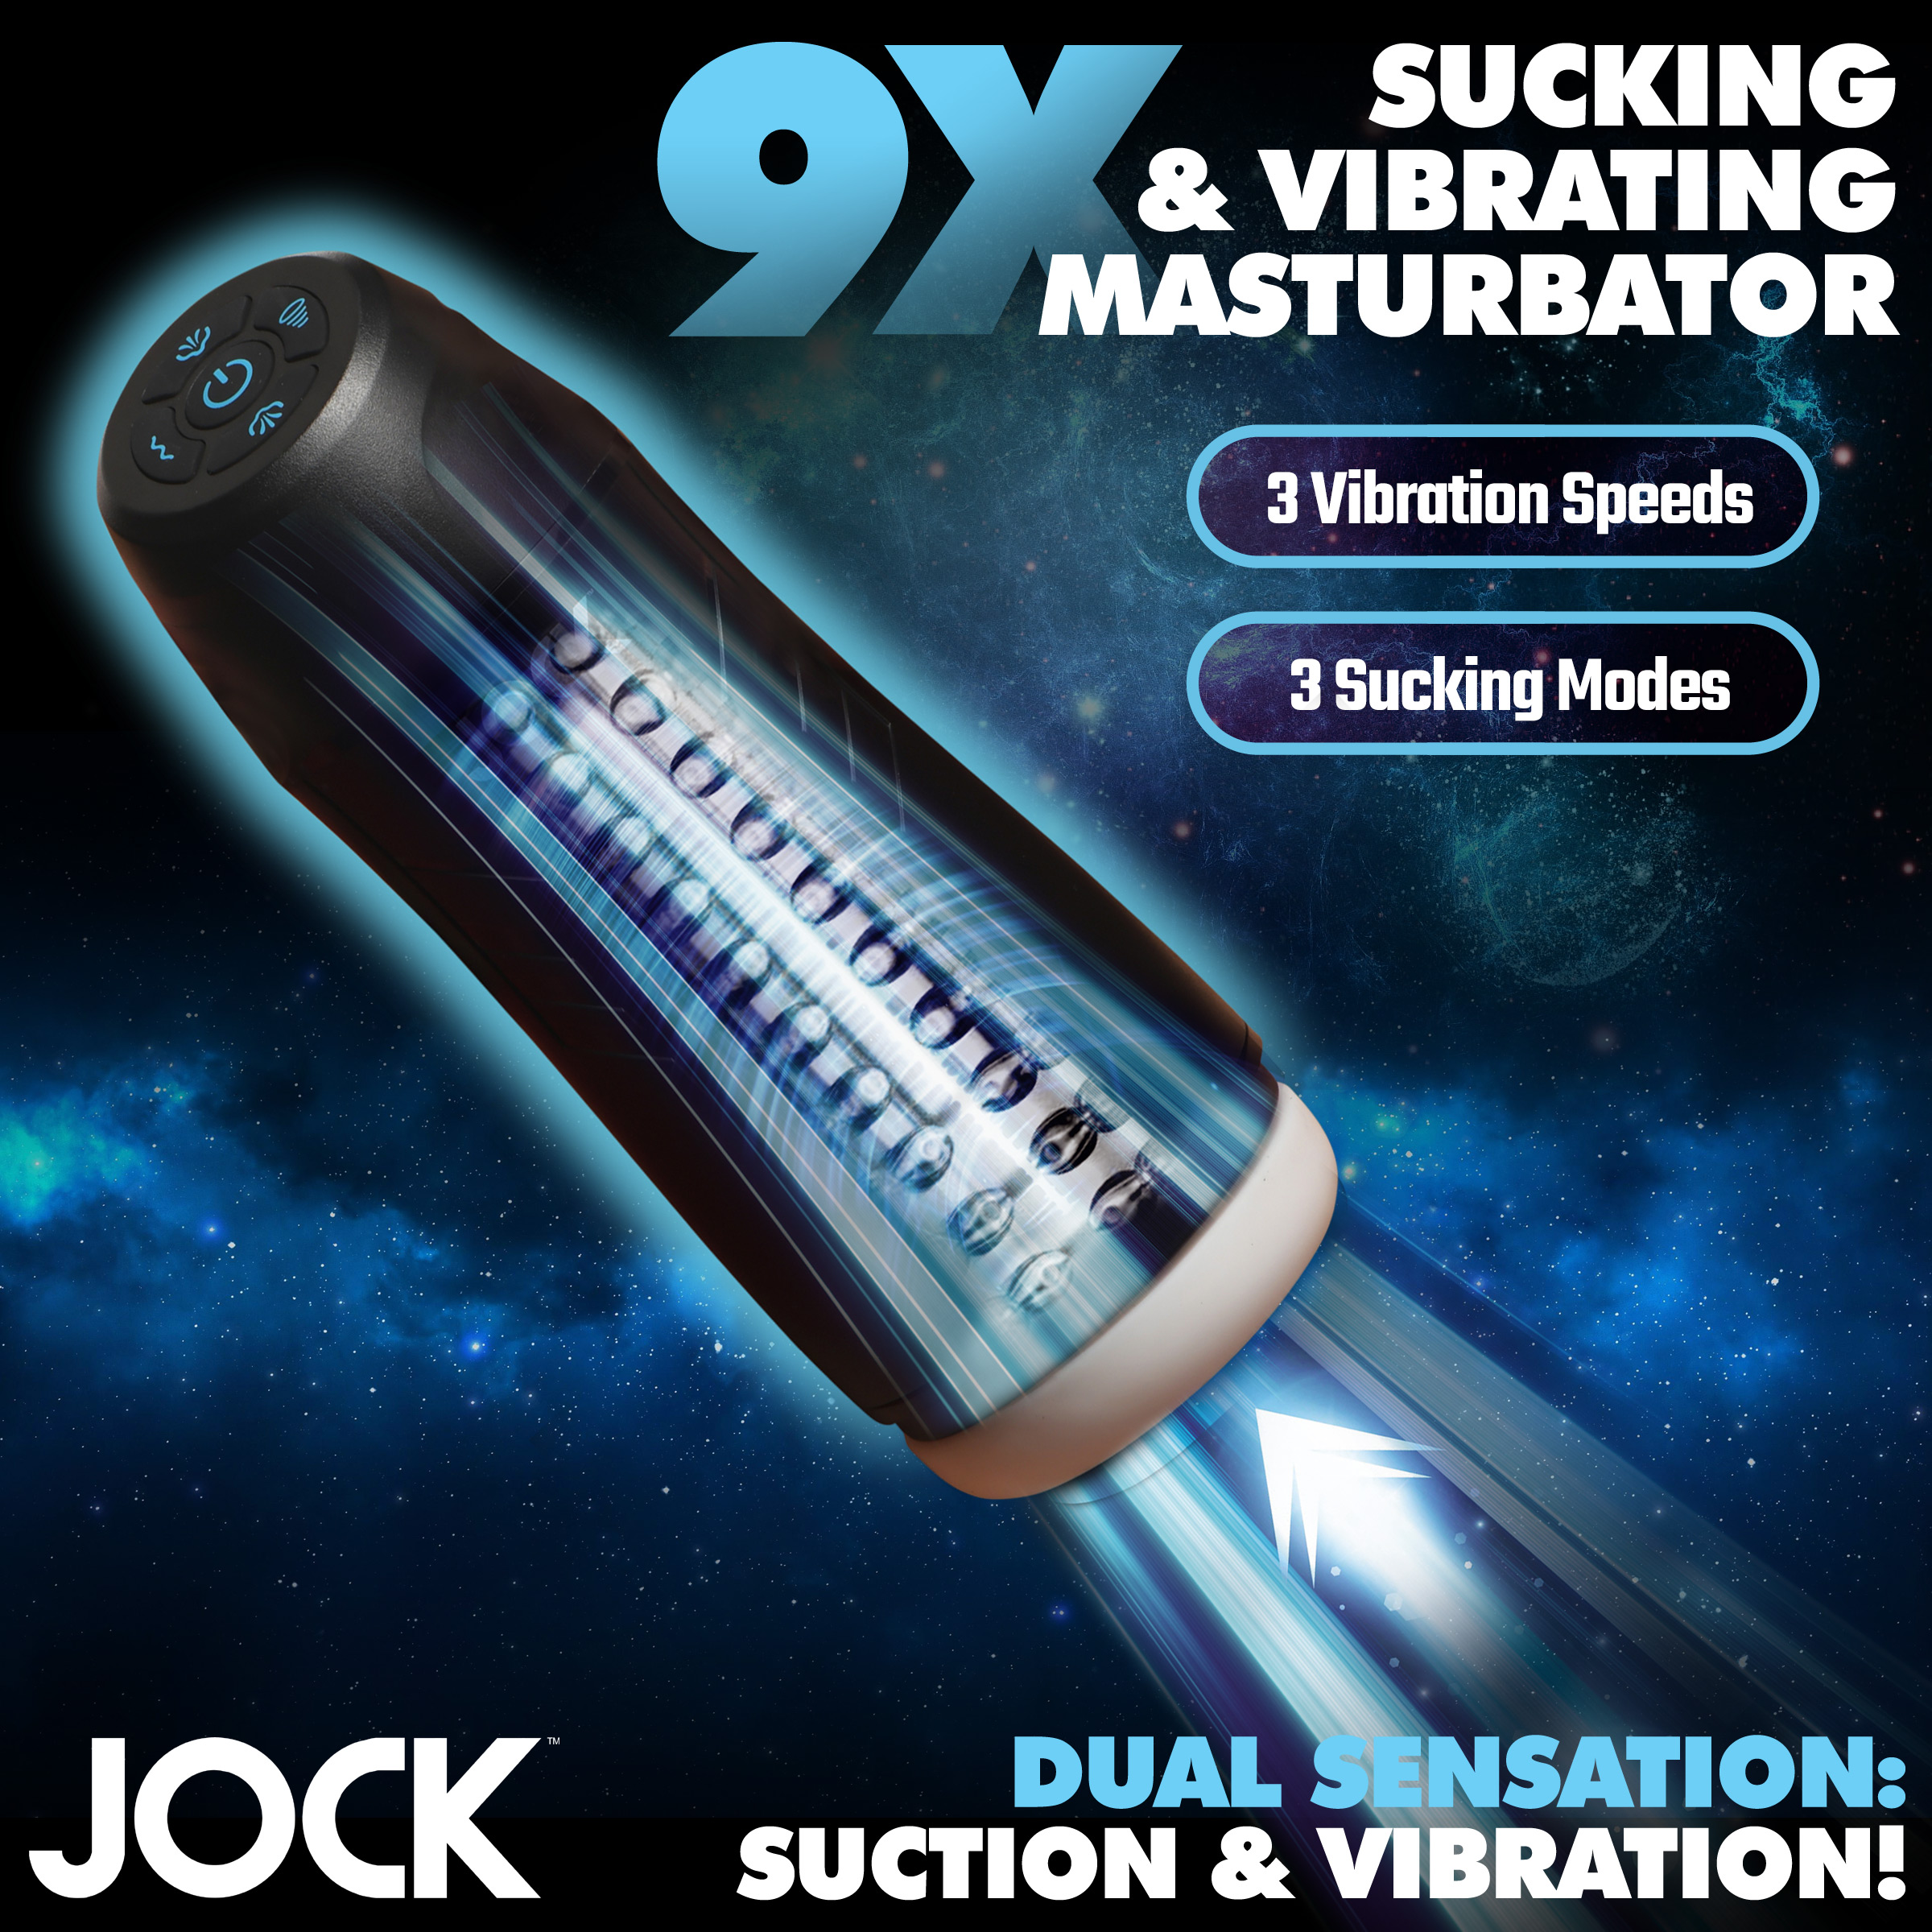 If you're going to indulge in a masturbator